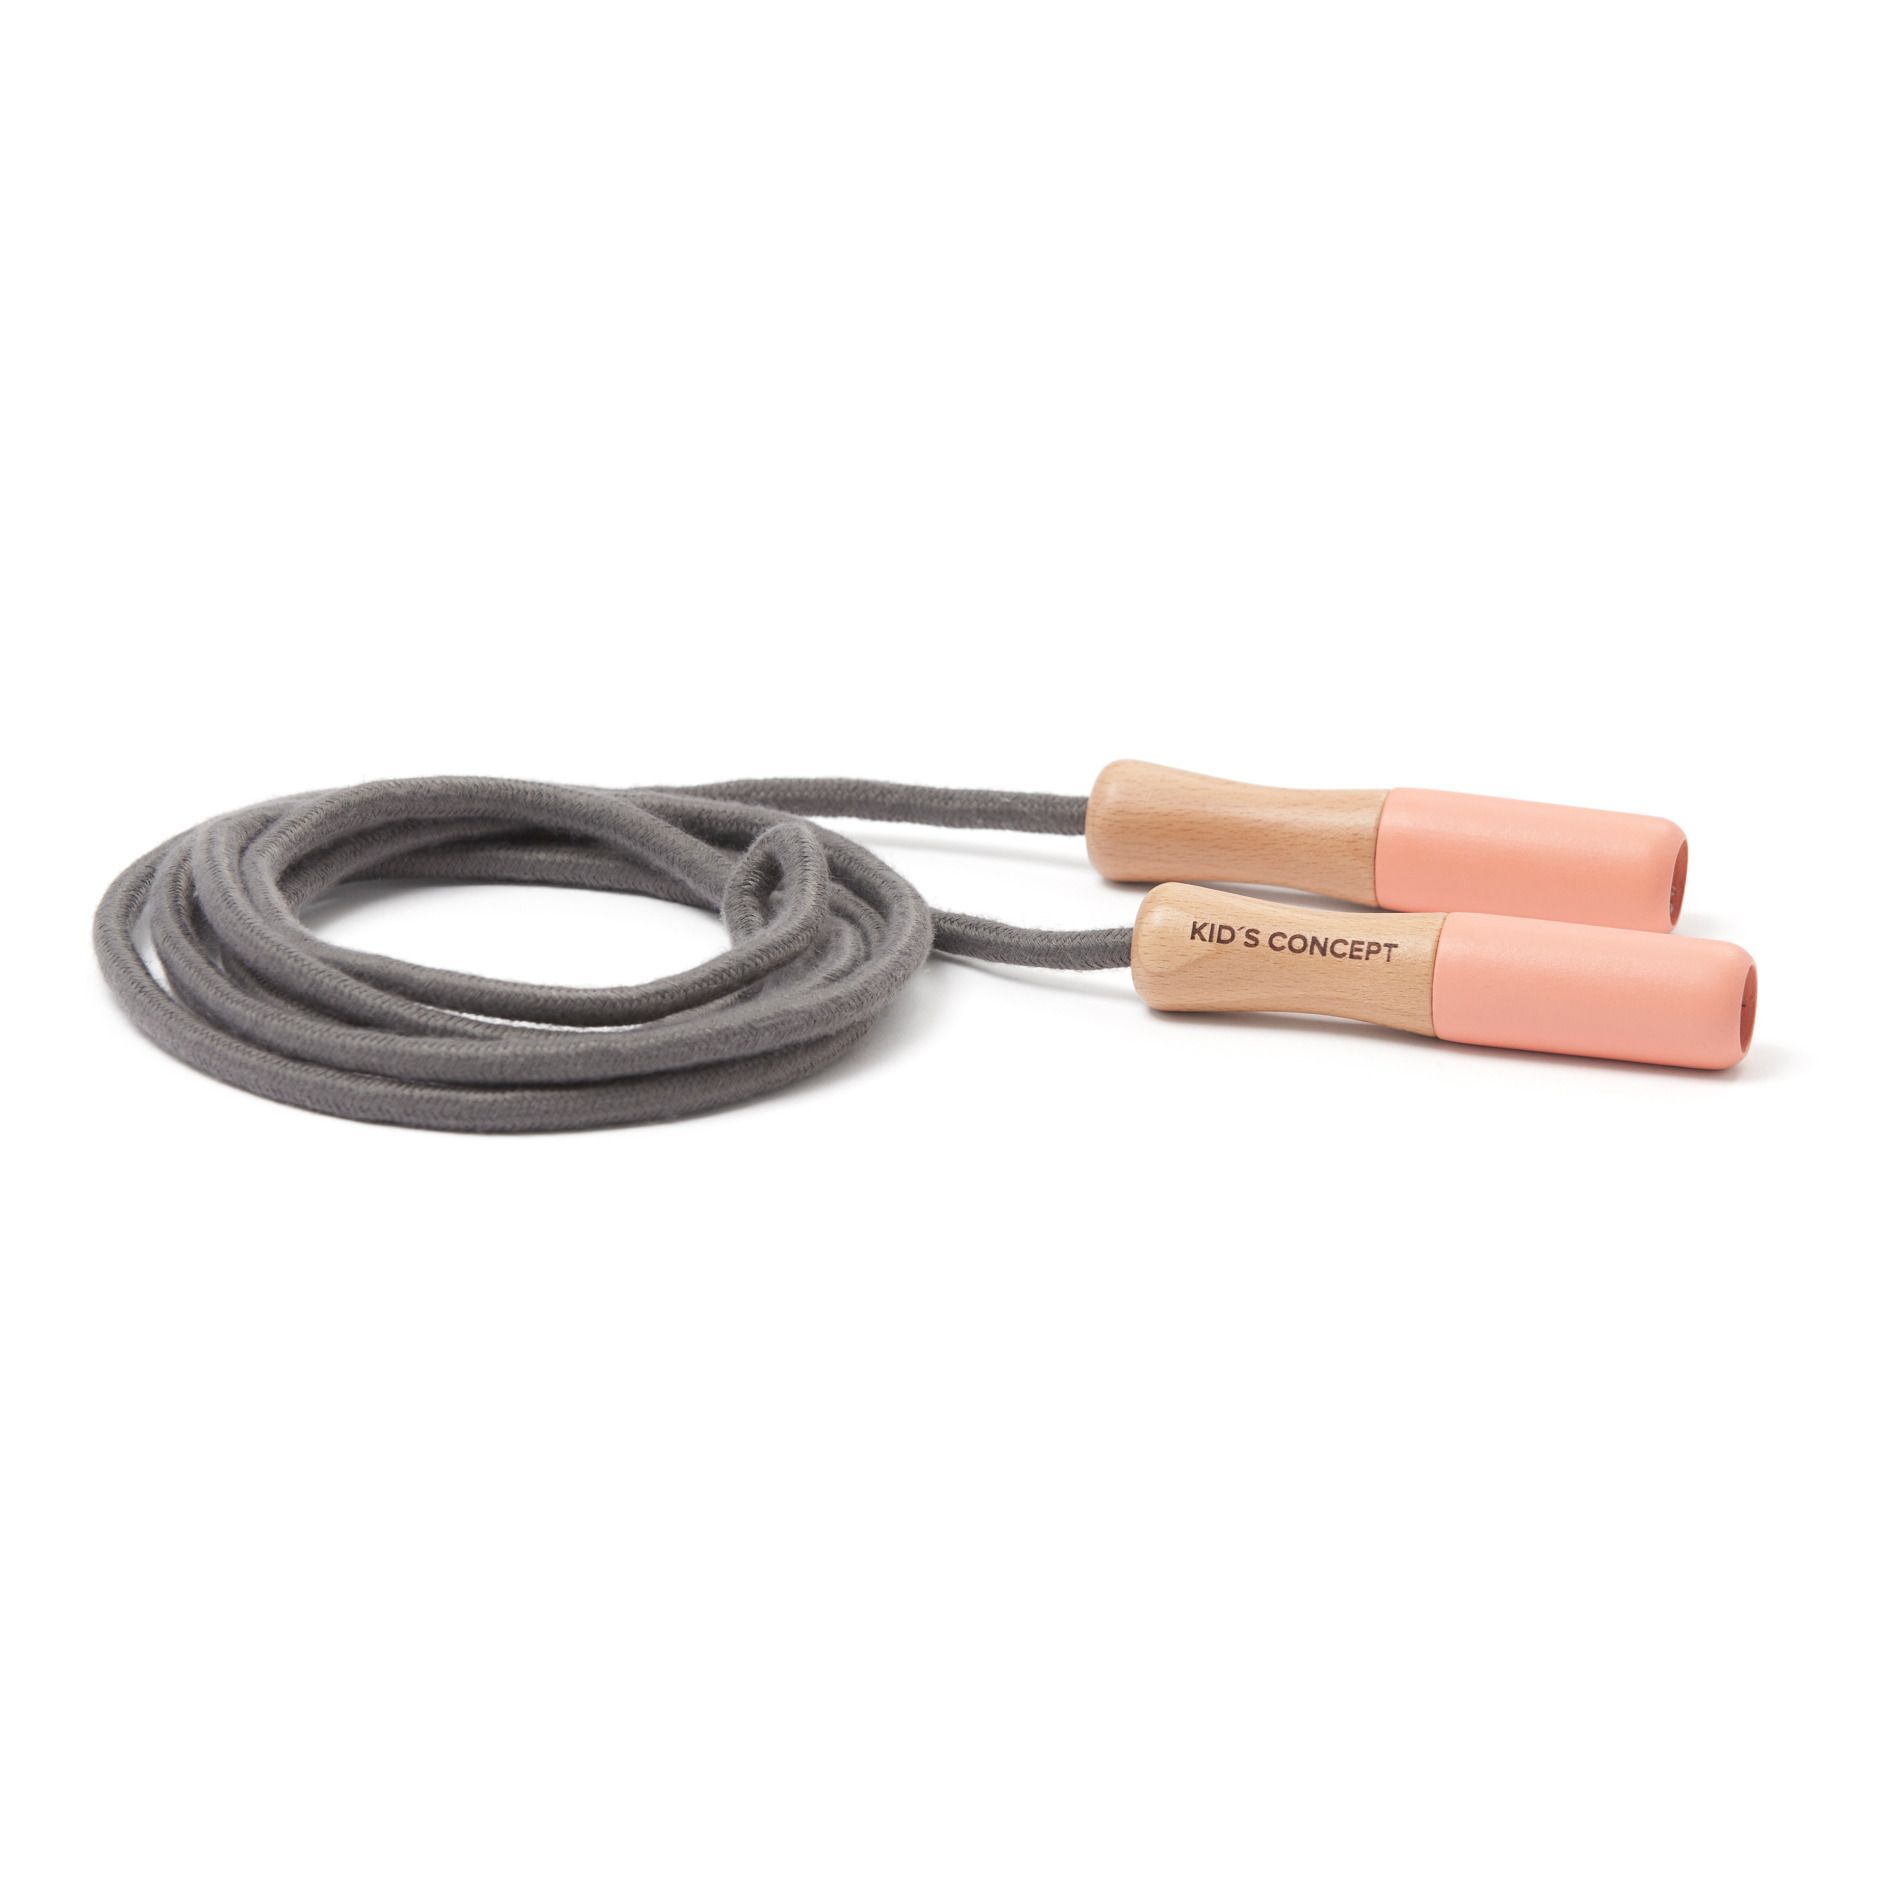 Kid's Concept Jump Rope Coral Pink one size unisex